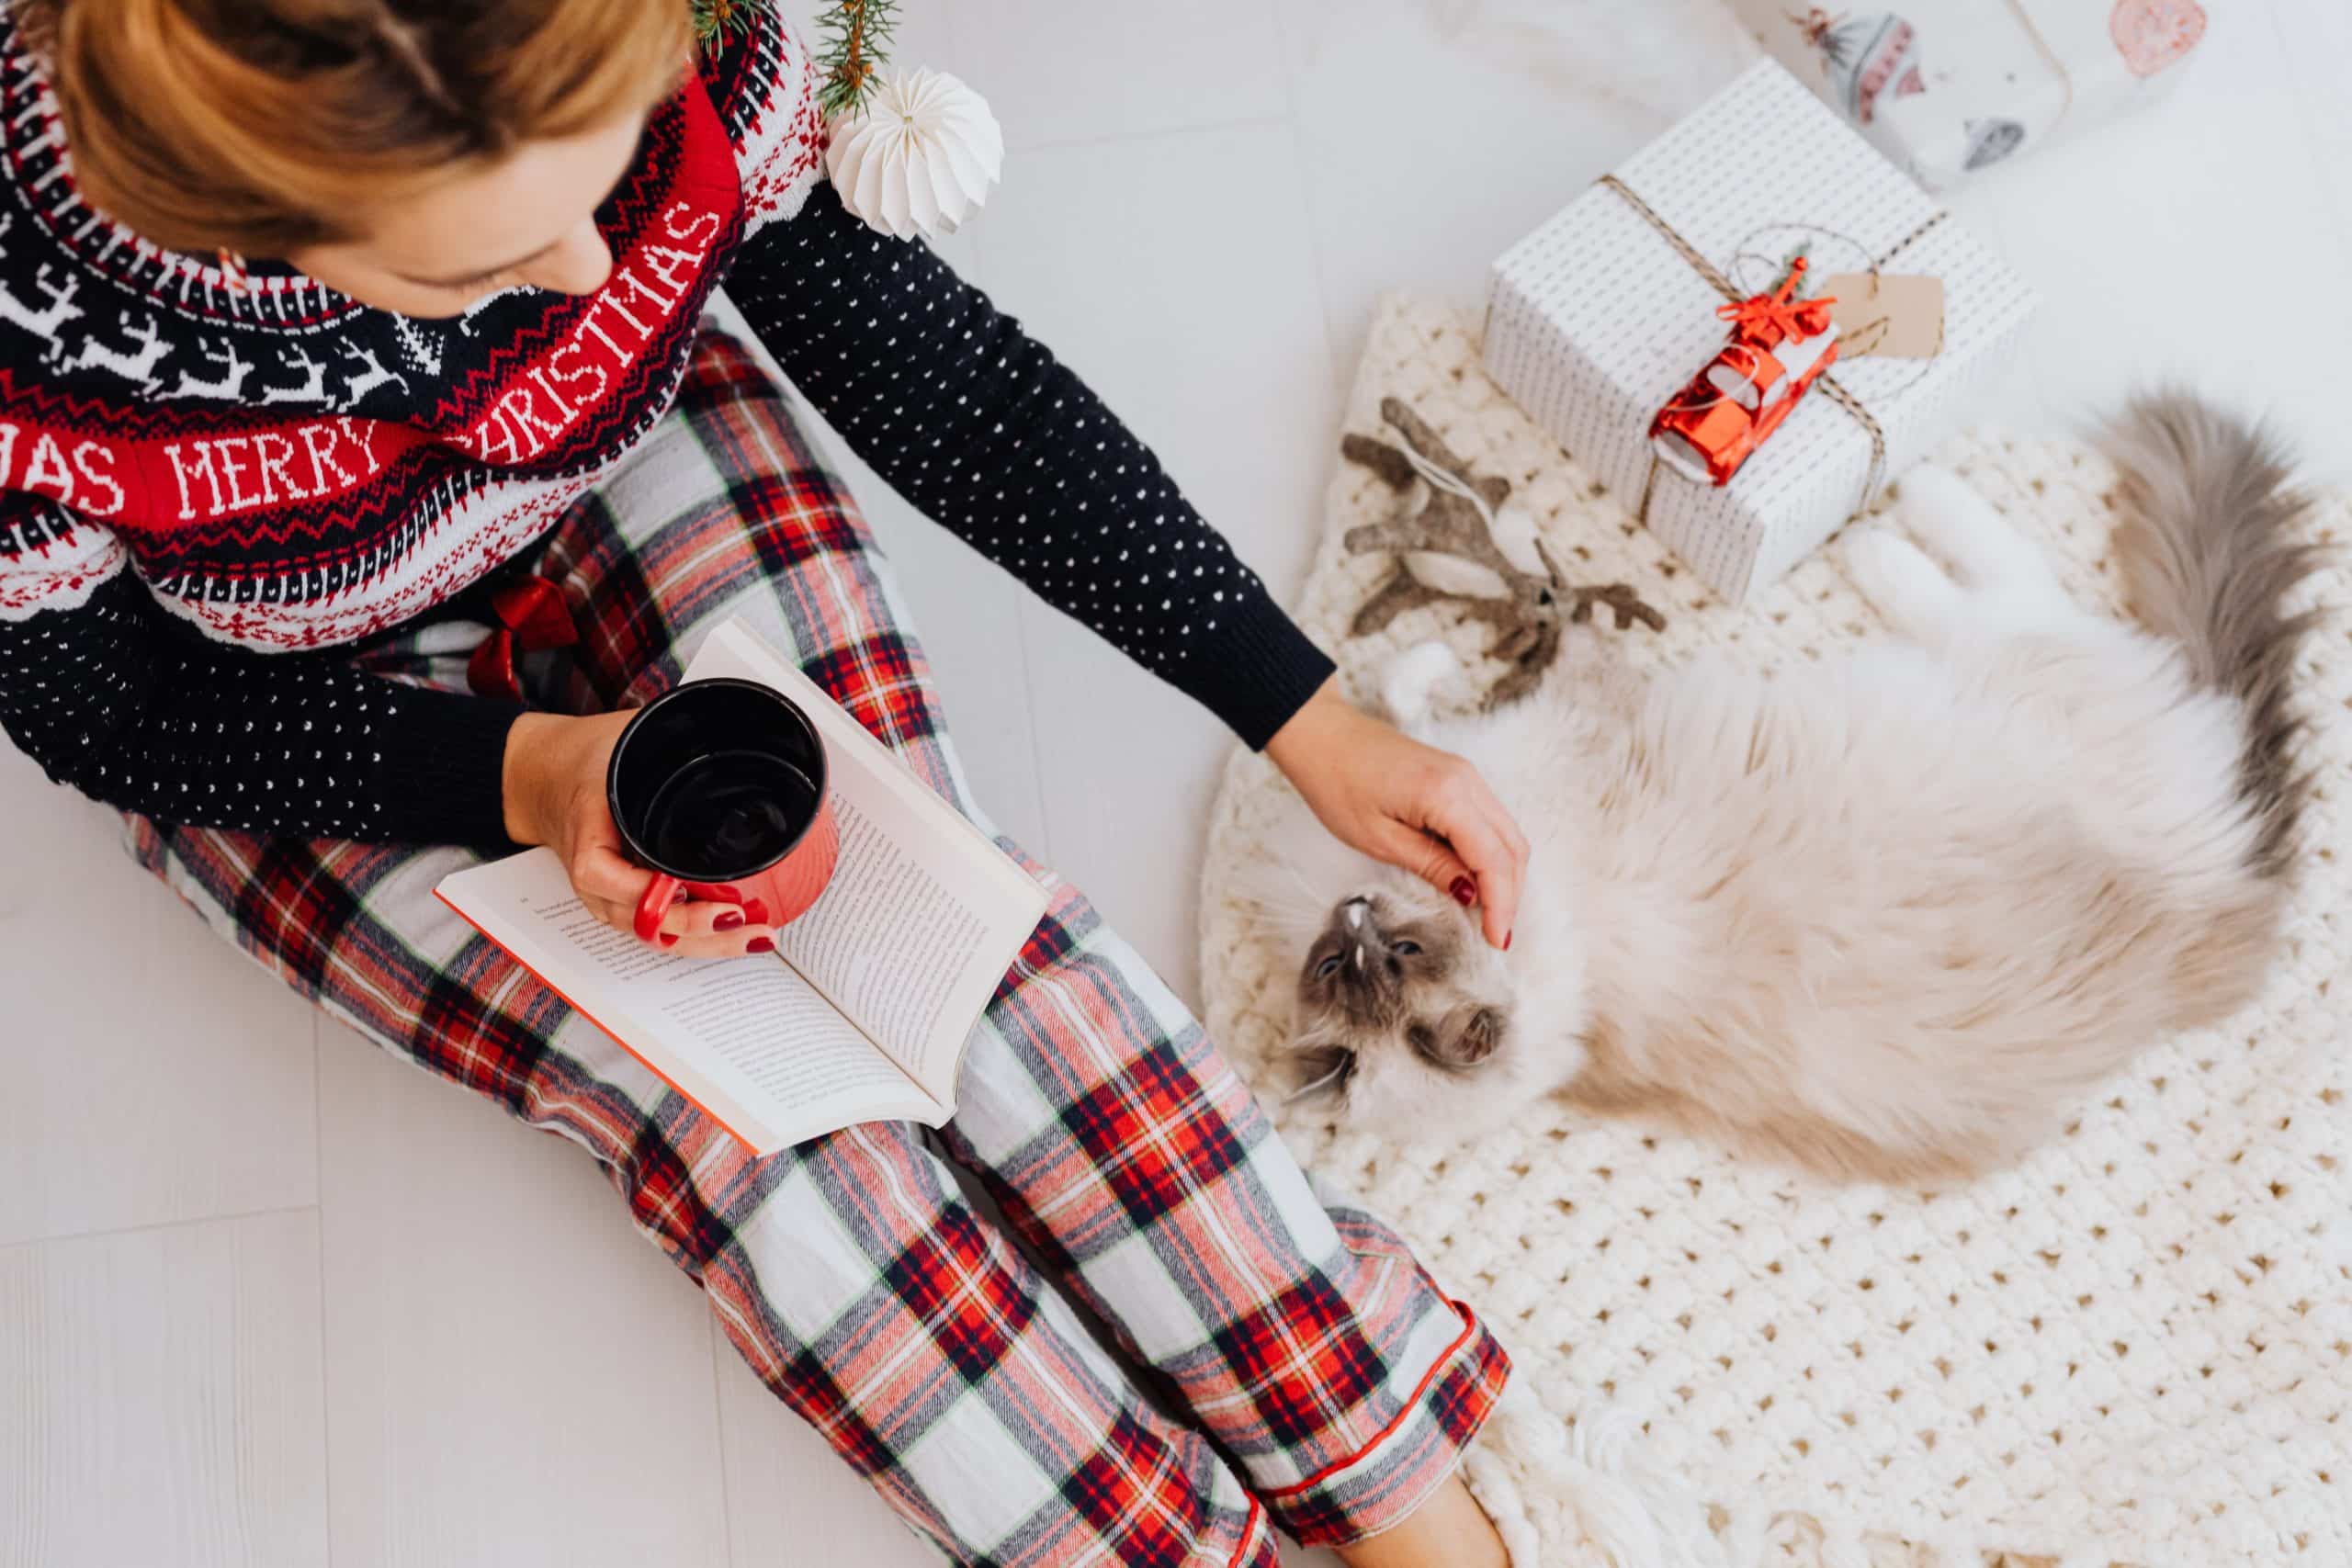 This woman with a Christmas jumper on patting a fluffy white cat is reading about how to find a good pet sitter